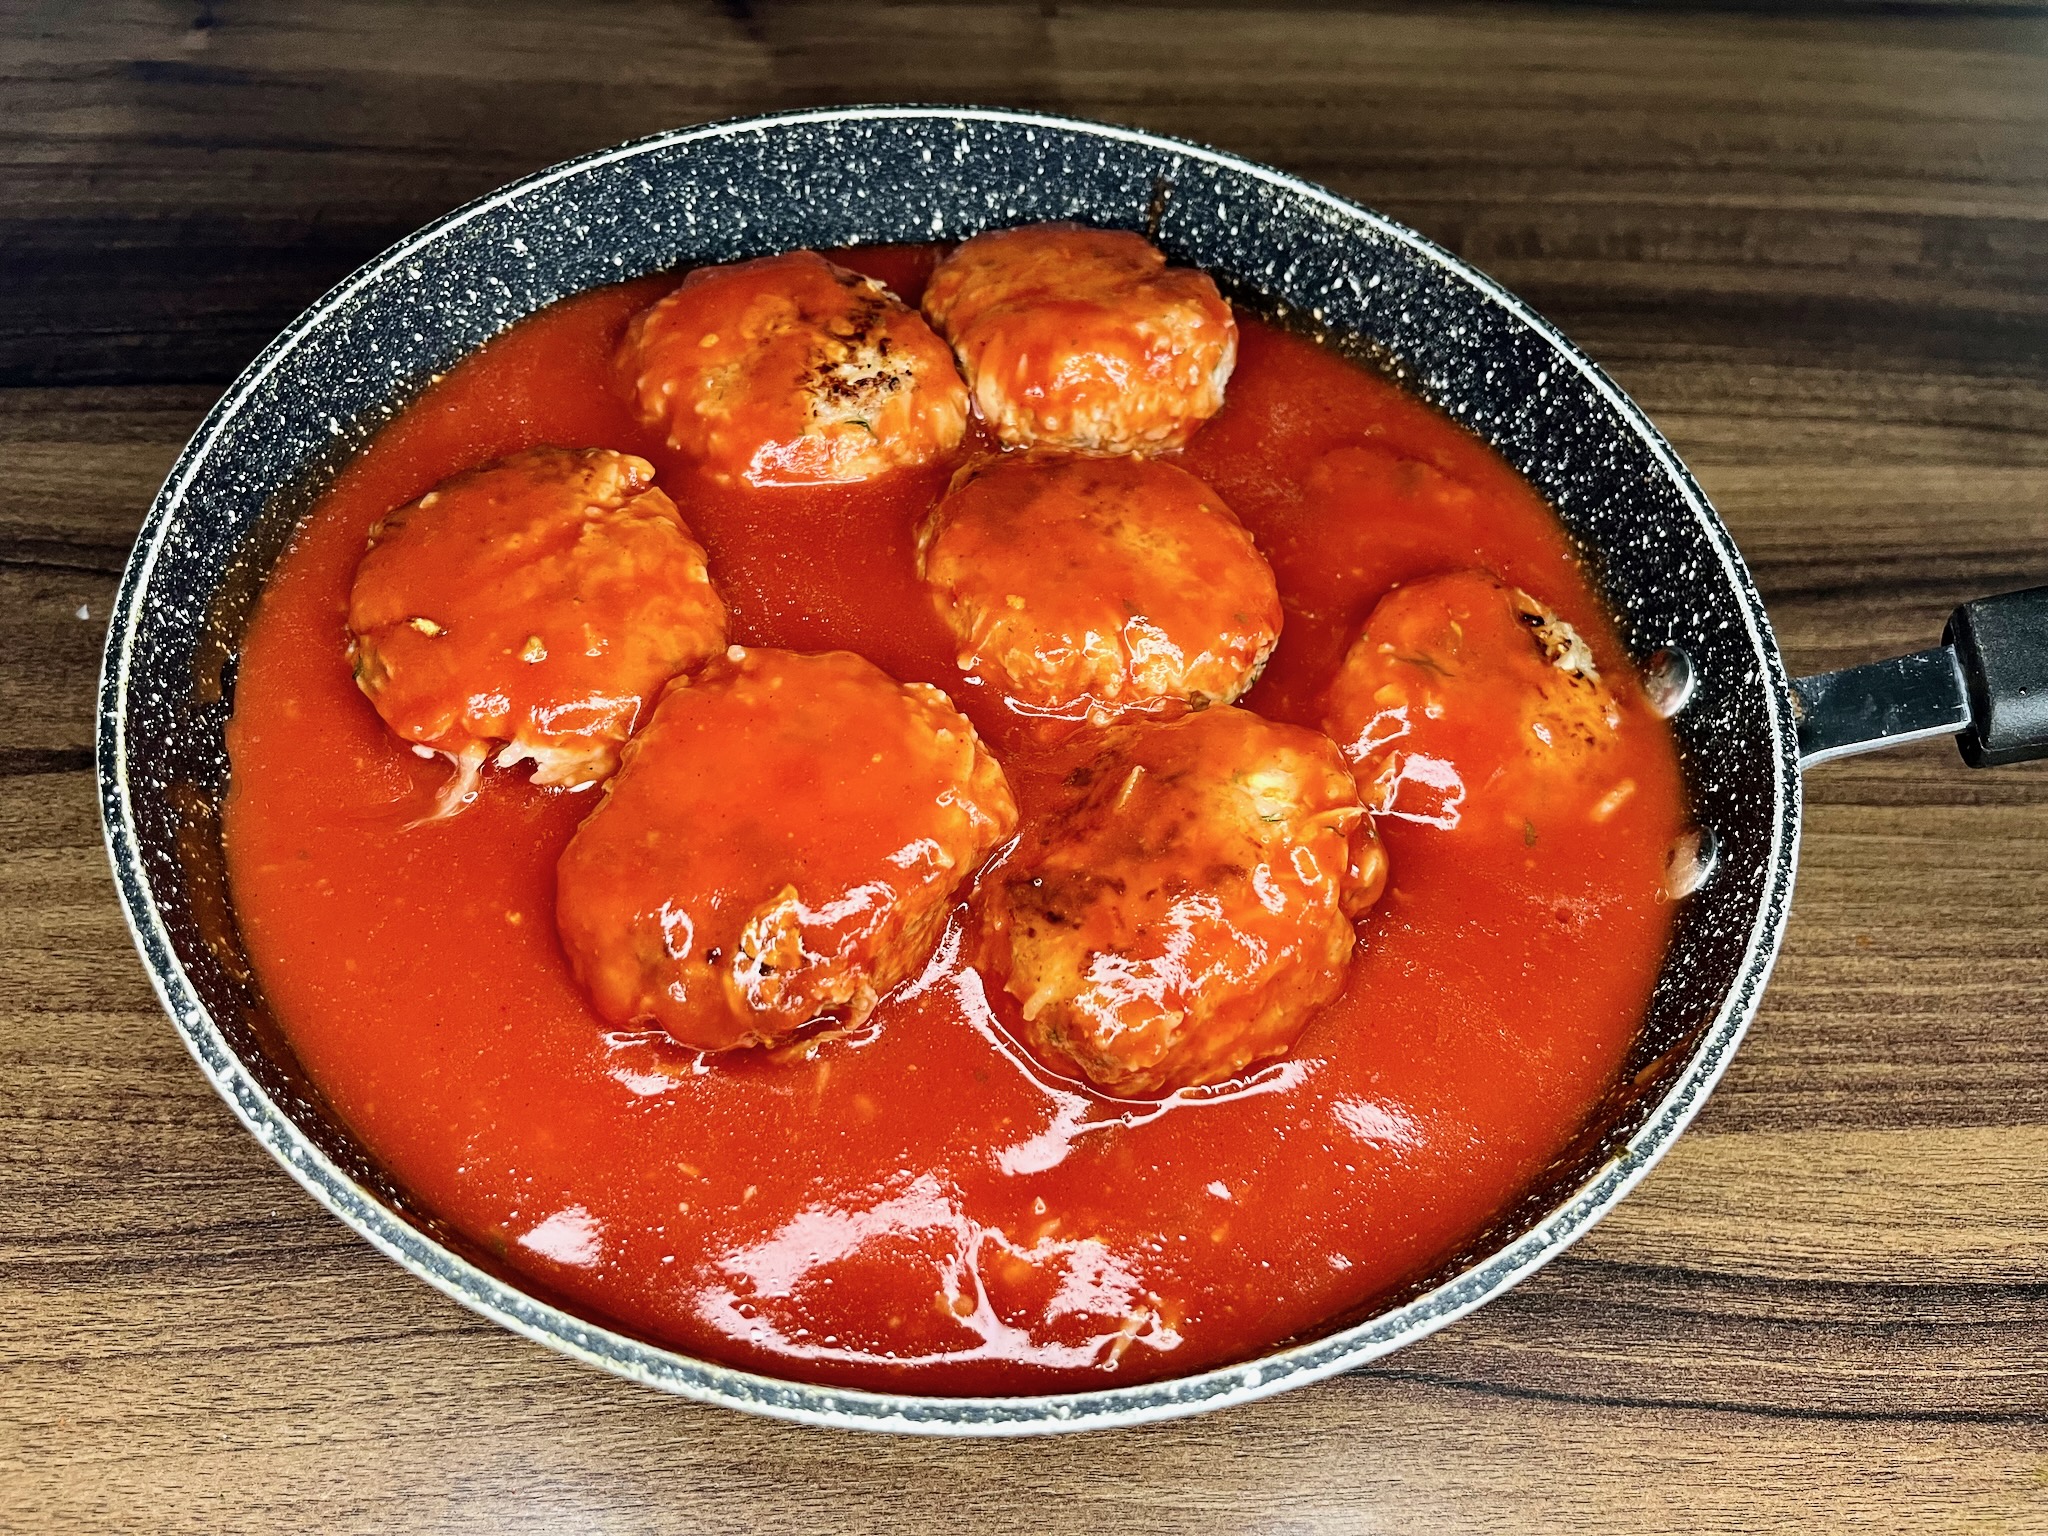 Fried gołąbki are in a deep pot, covered in a thick tomato sauce